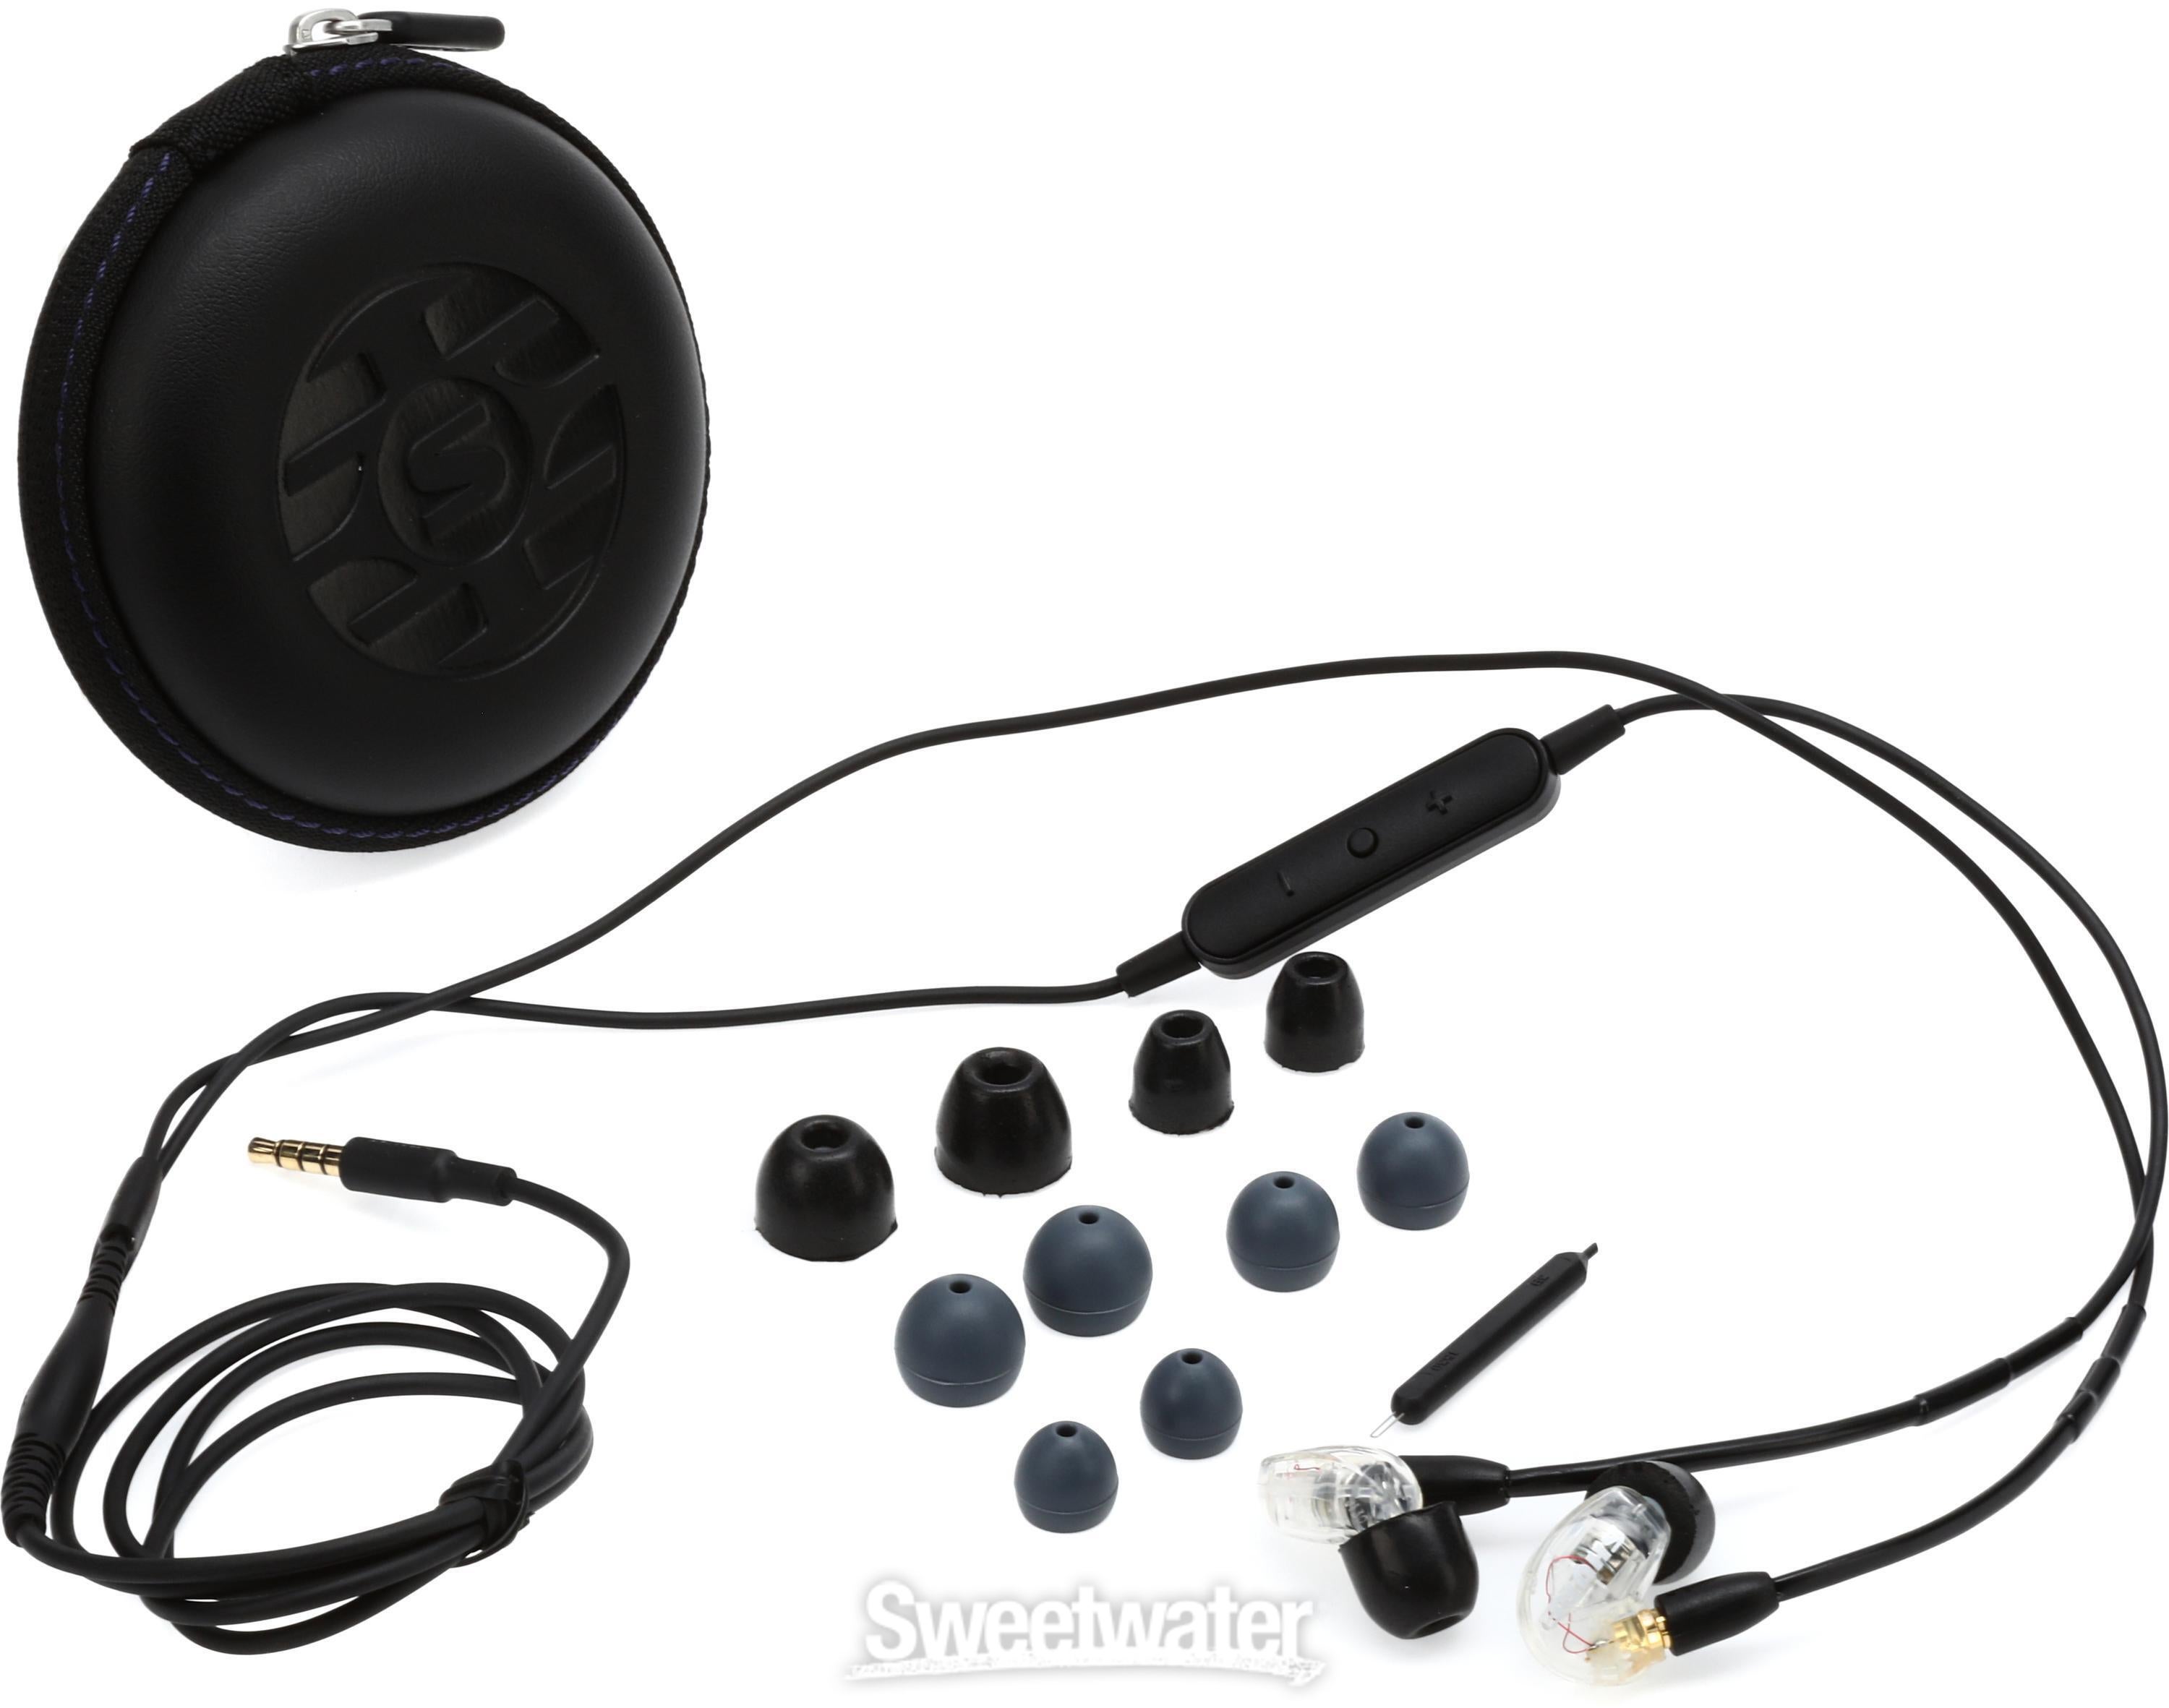 Shure AONIC 215 Sound Isolating Earphones - Clear | Sweetwater